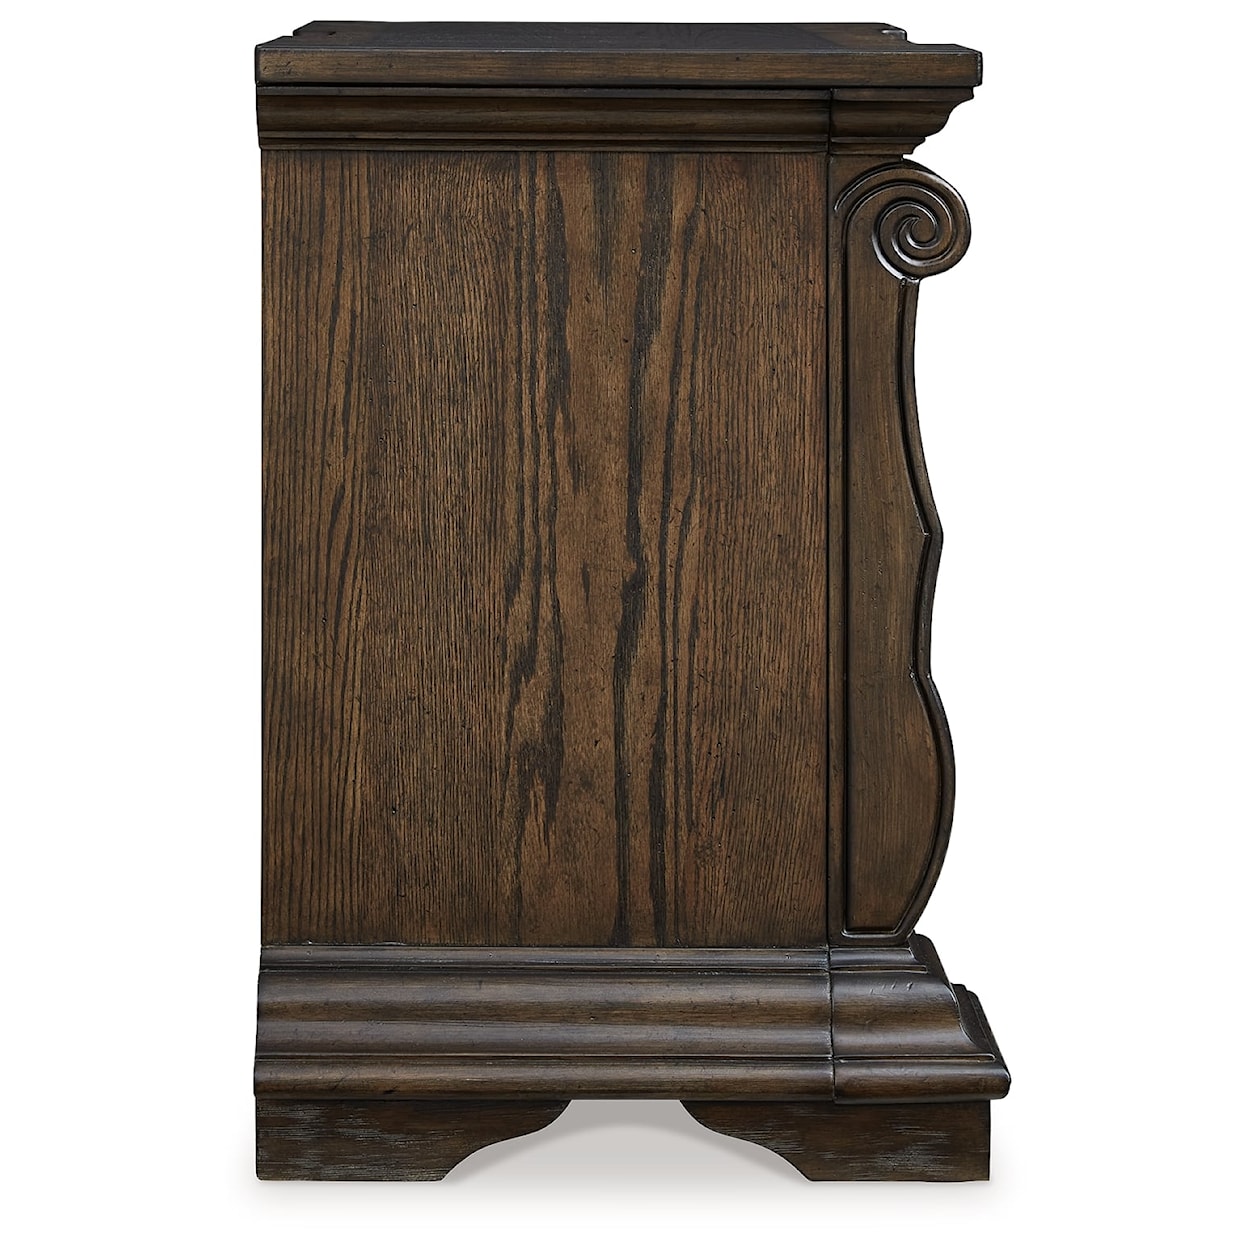 Signature Design by Ashley Maylee 3-Drawer Nightstand